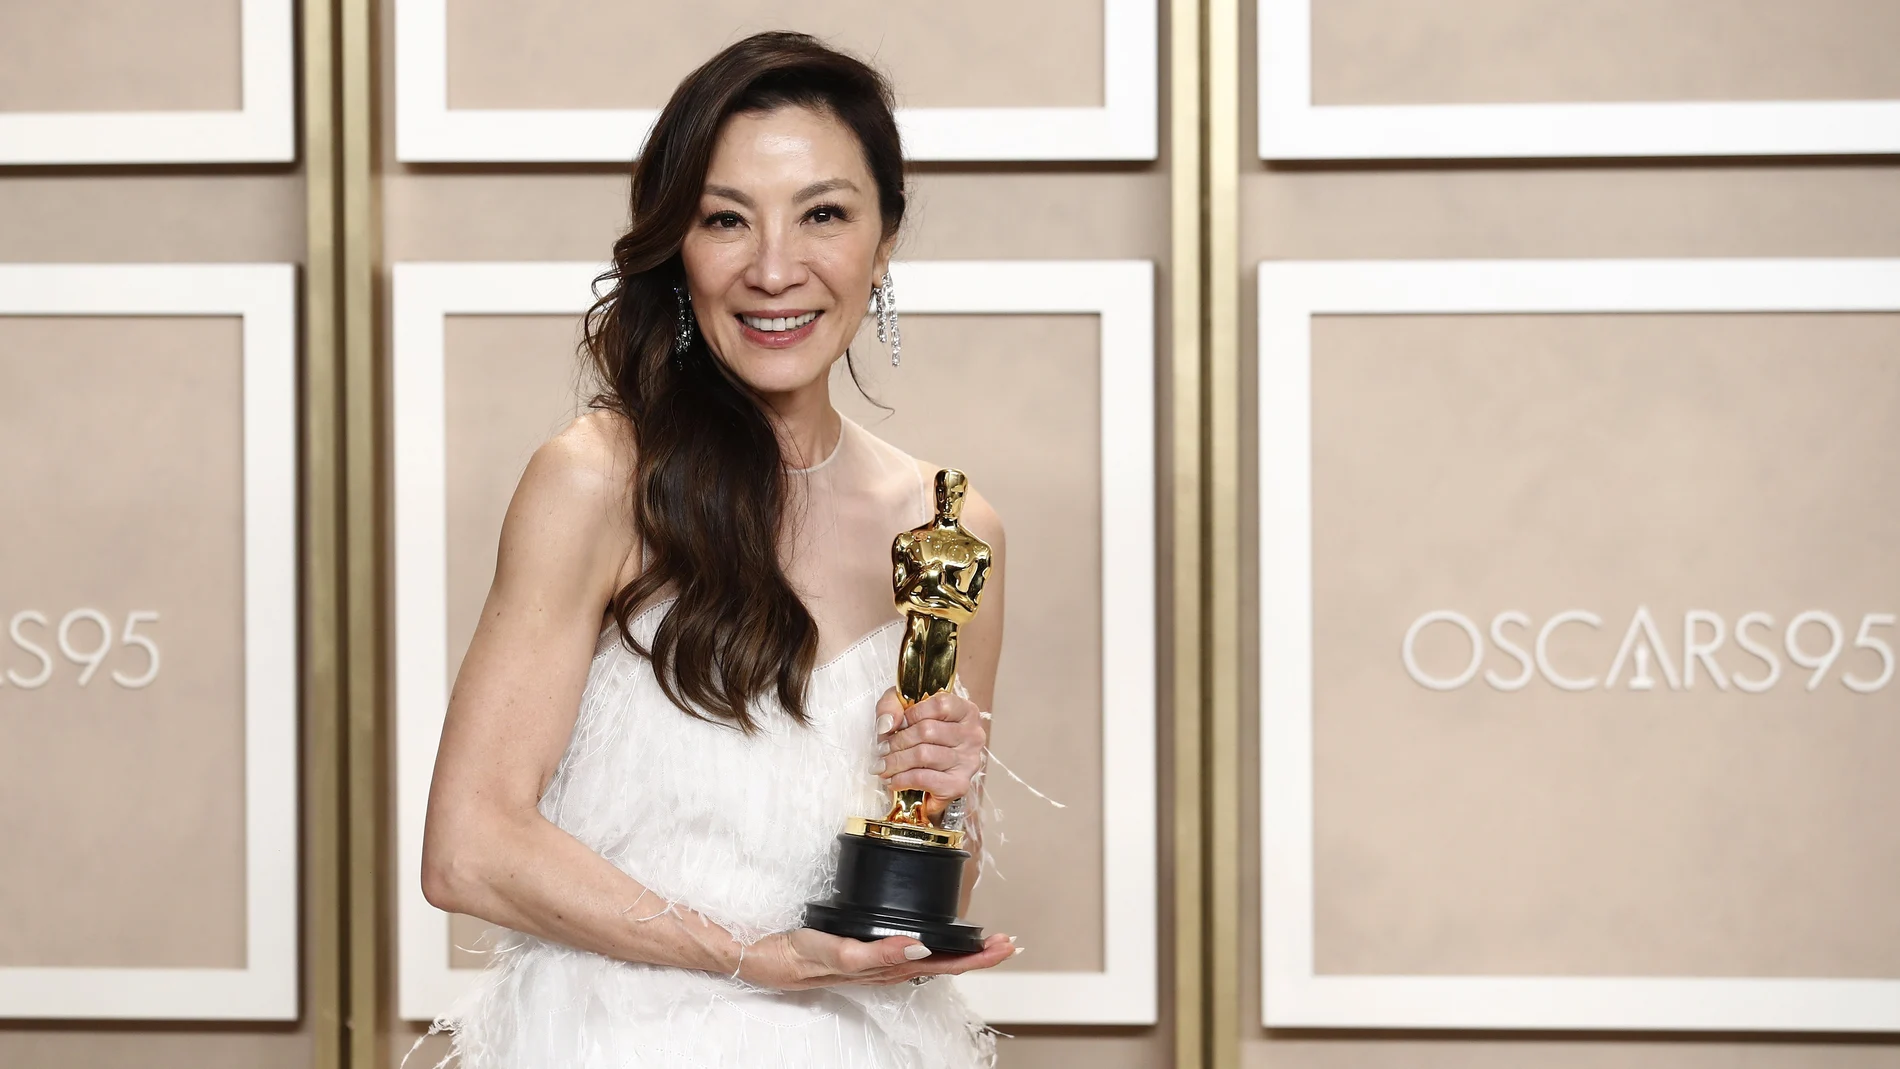 Michelle Yeoh with her Oscar for Best Actress for 'Everything Everywhere All at Once' in the press room during the 95th annual Academy Awards ceremony at the Dolby Theatre in Hollywood, Los Angeles, California, USA, 12 March 2023. The Oscars are presented for outstanding individual or collective efforts in filmmaking in 24 categories. 